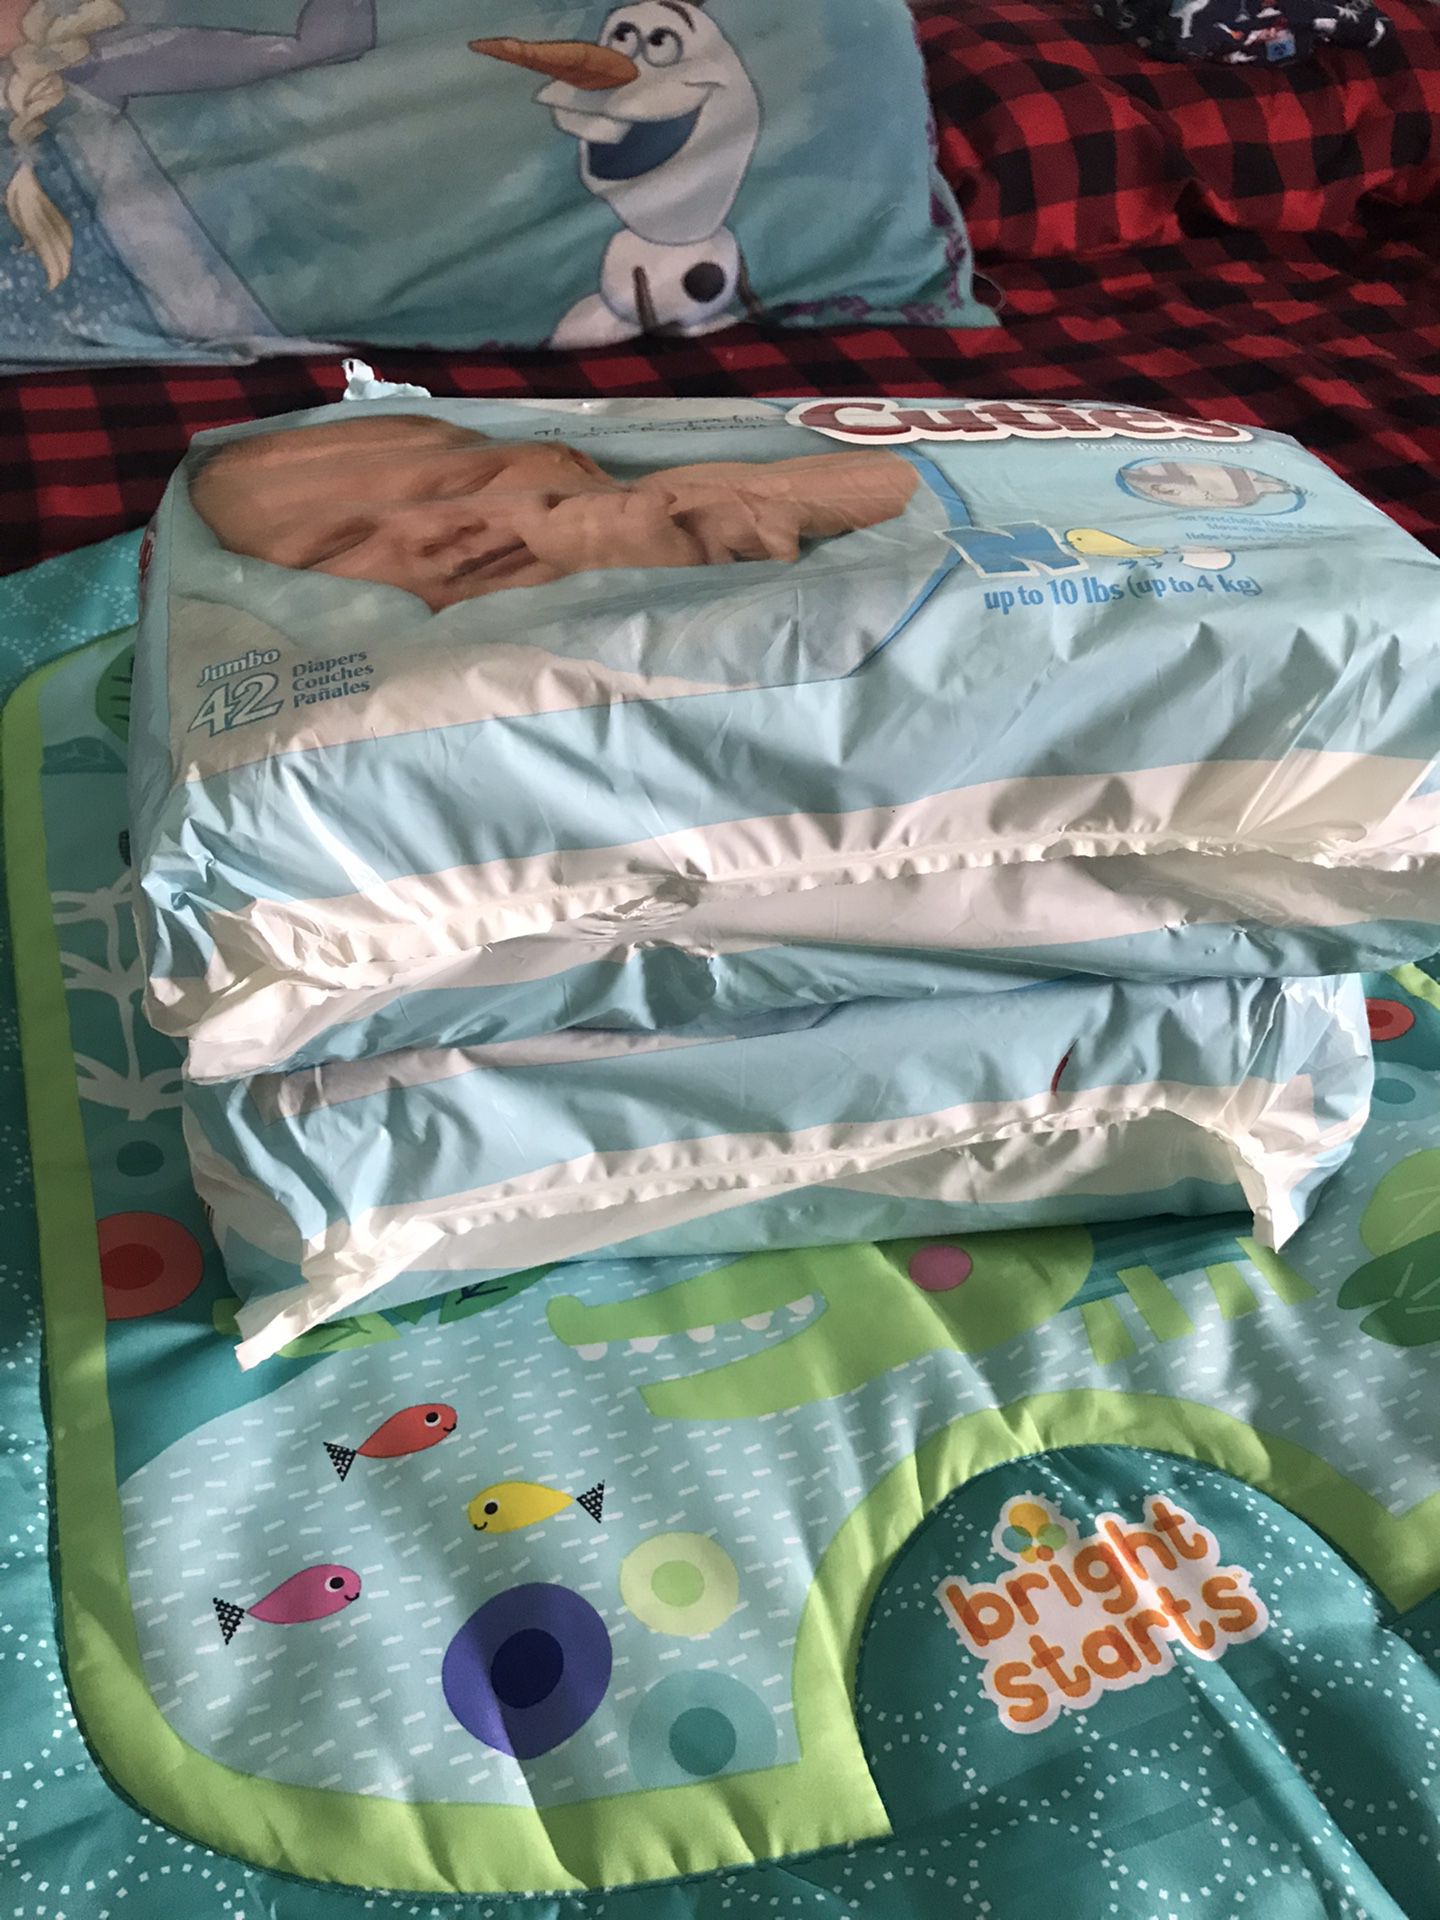 Newborn diapers both for $6